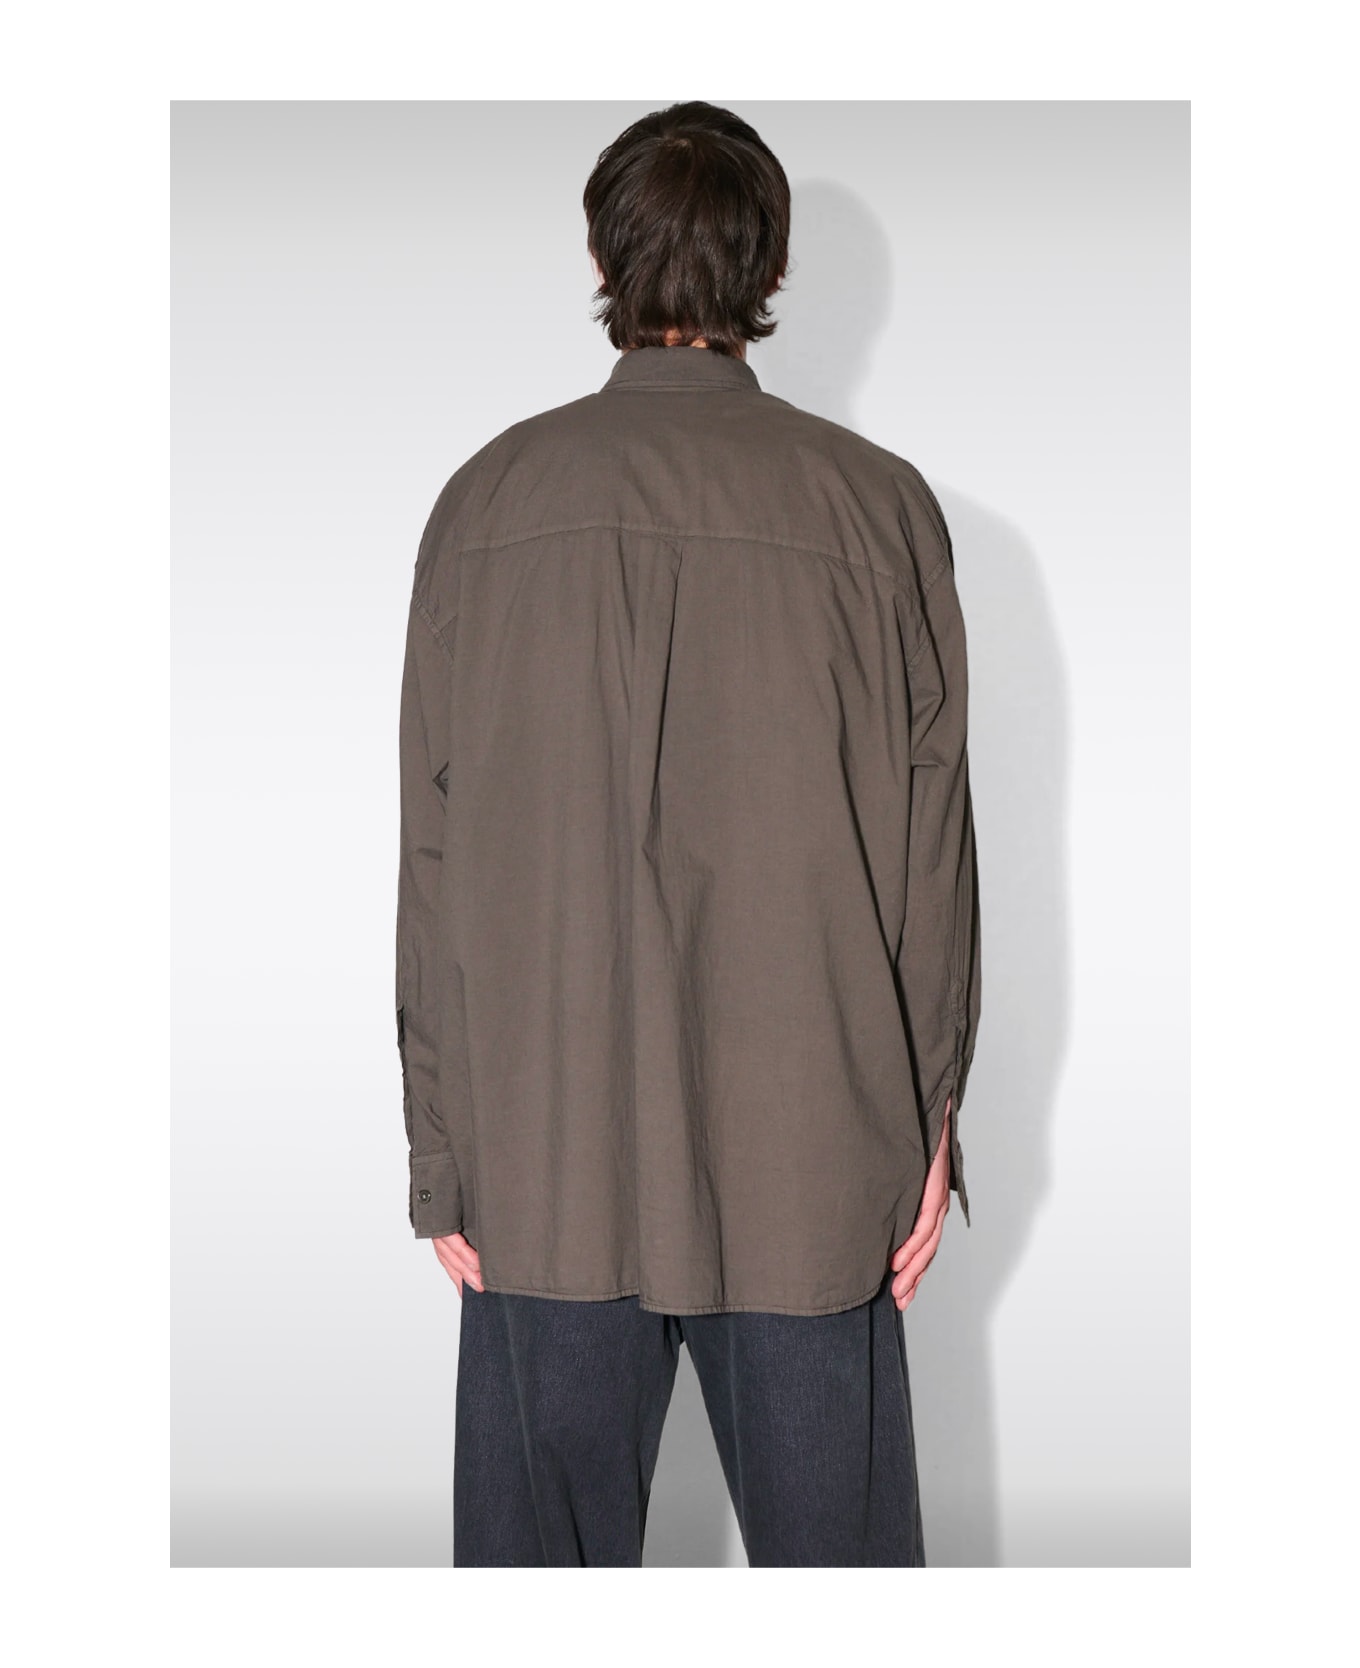 Our Legacy Borrowed Bd Shirt Faded brown lightweight cotton shirt with long sleeves - Borrowed BD Shirt - Marrone